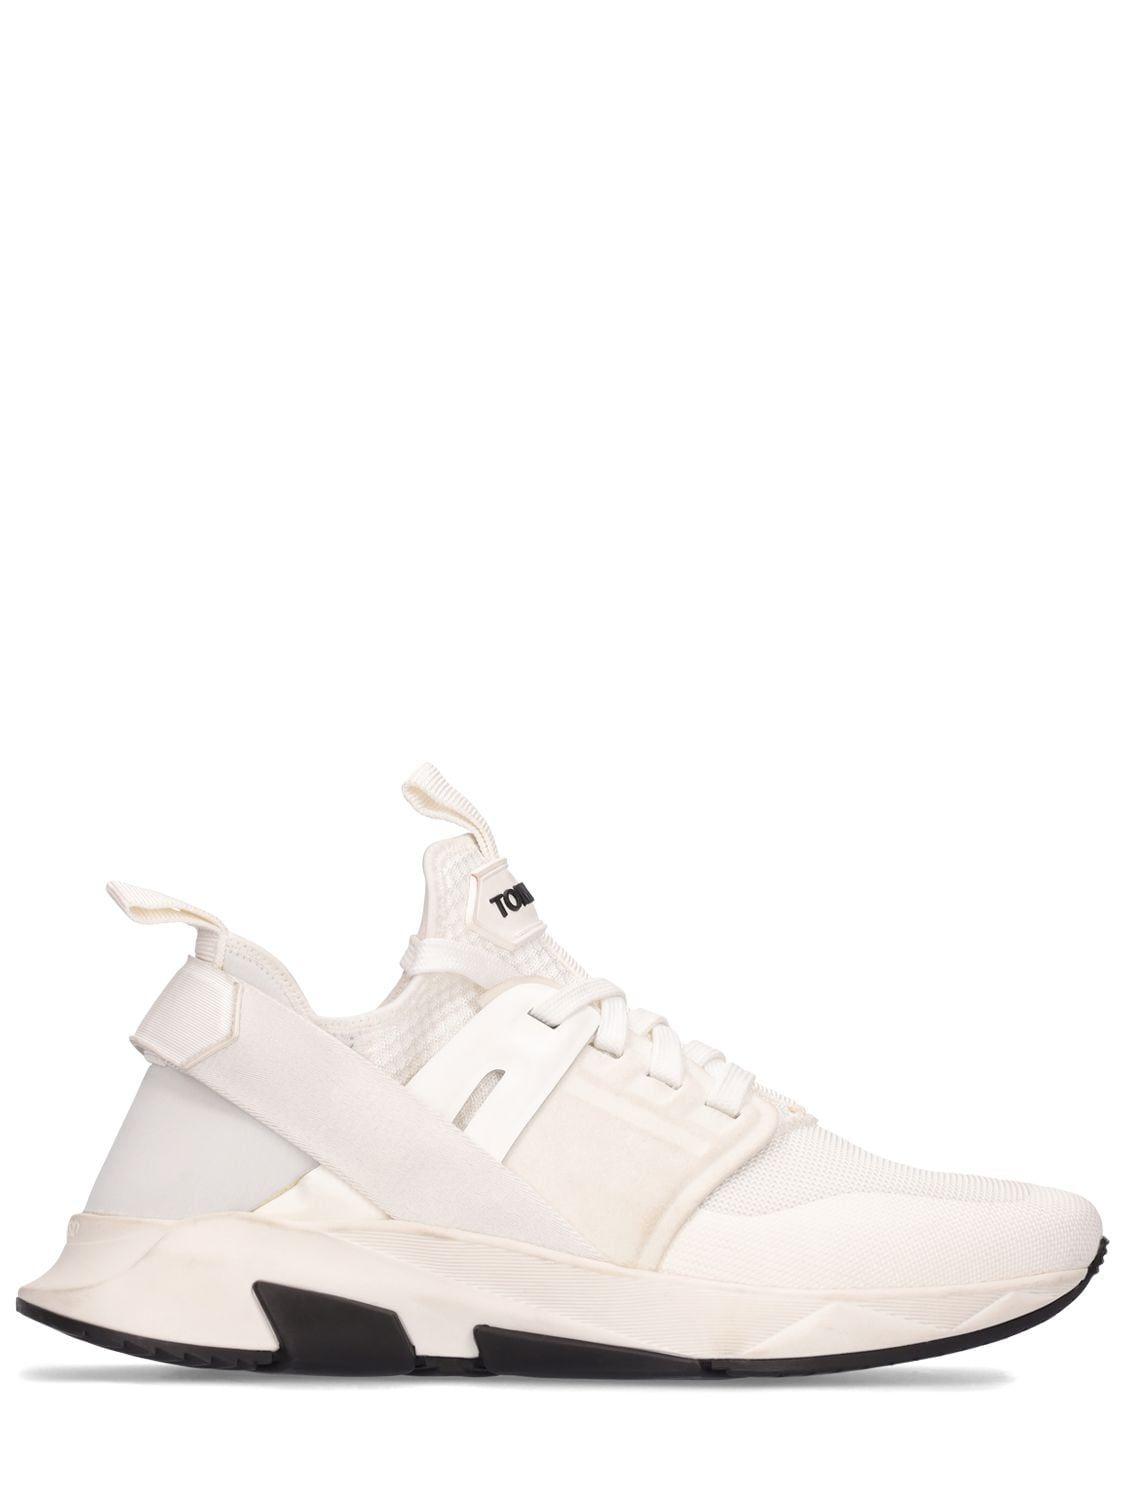 Tom Ford Alcantara Tech & Leather Low Sneakers in White for Men | Lyst